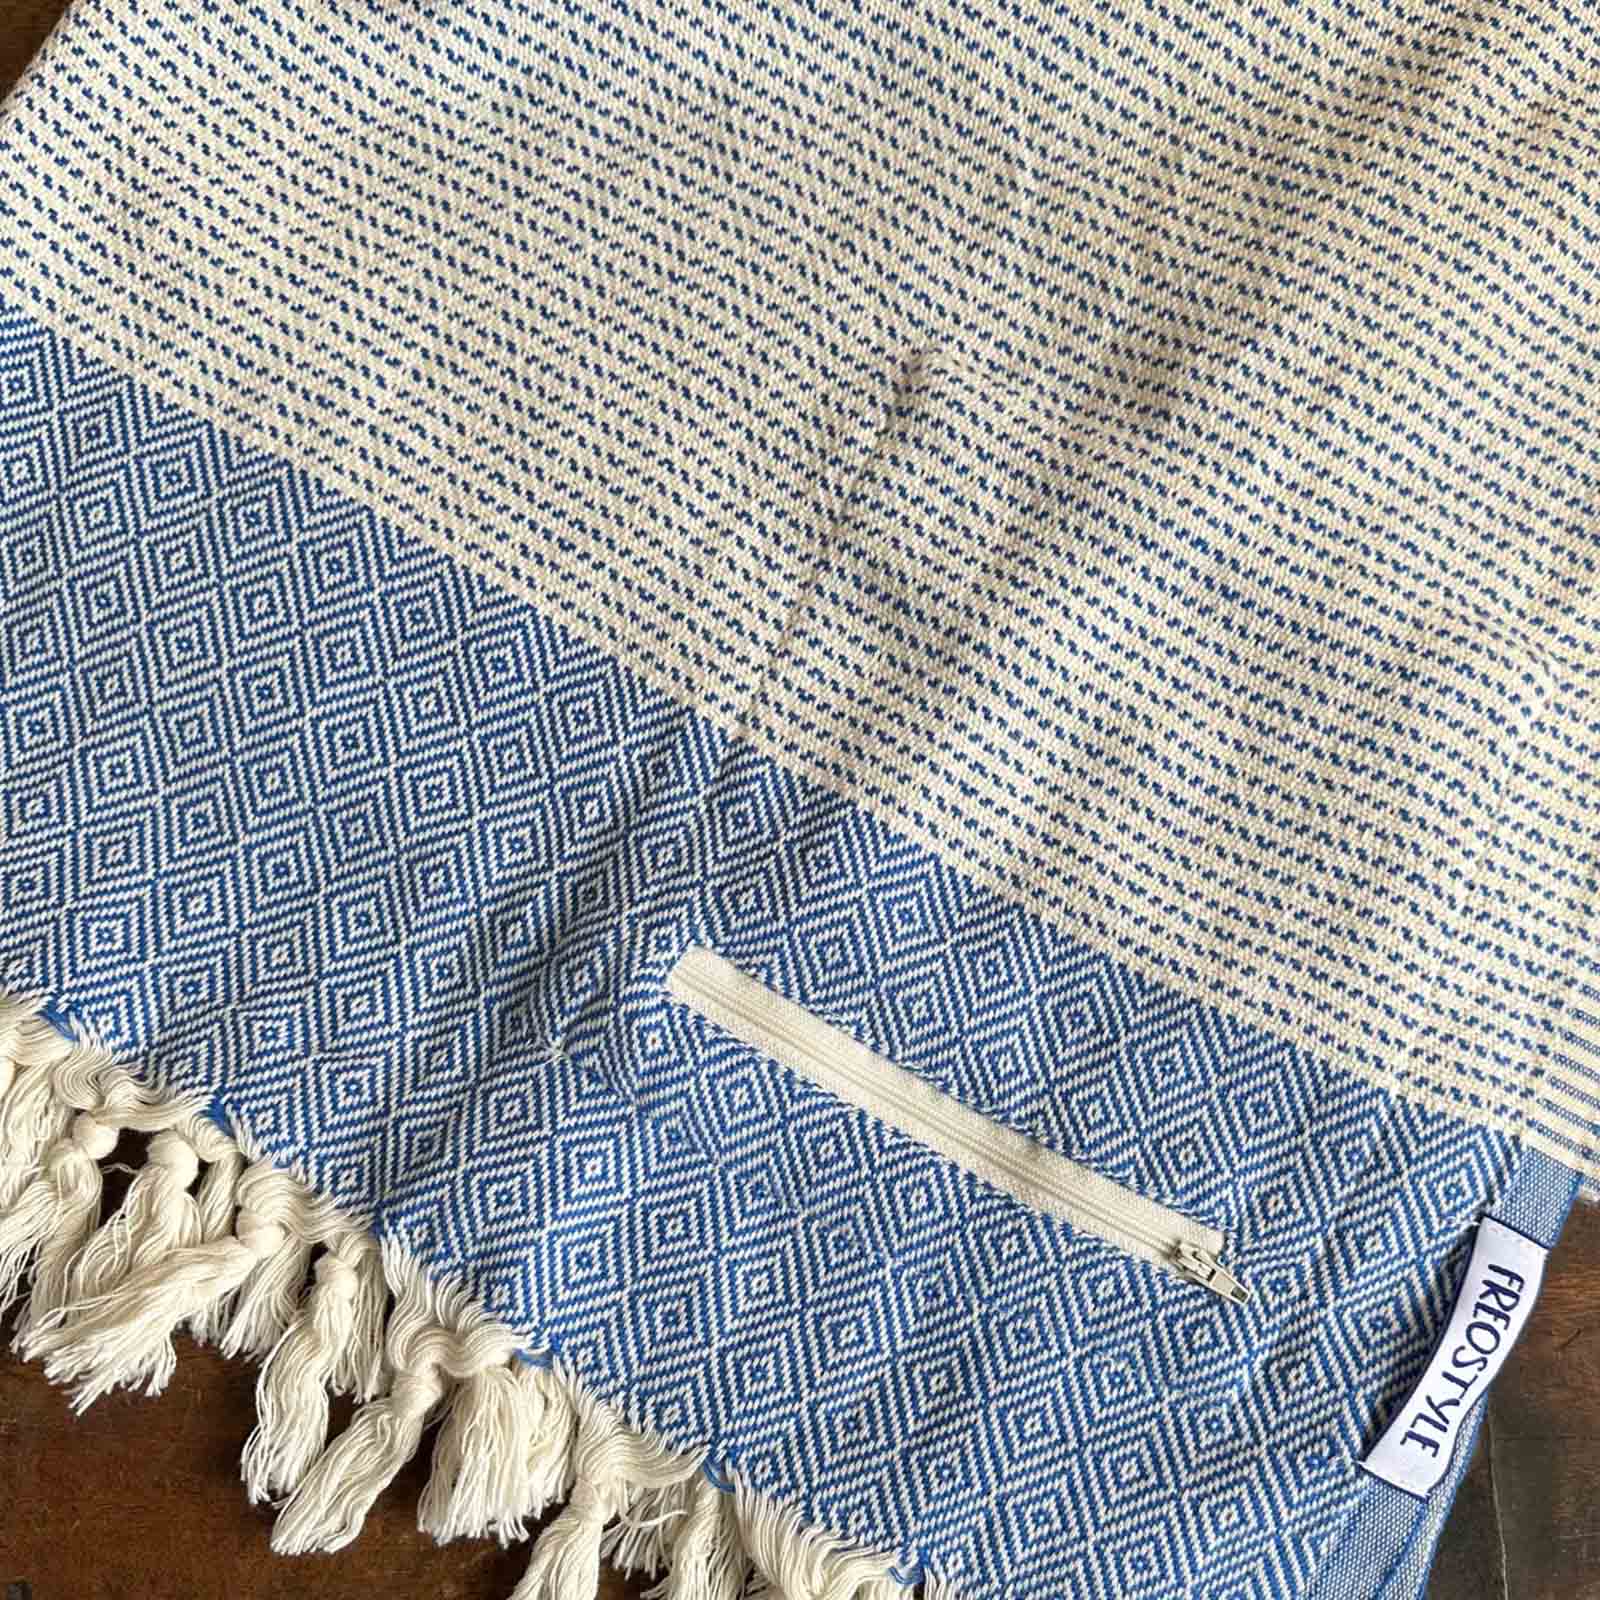 Archipelego Turkish Towel with Pockets, folded, by Freostyle